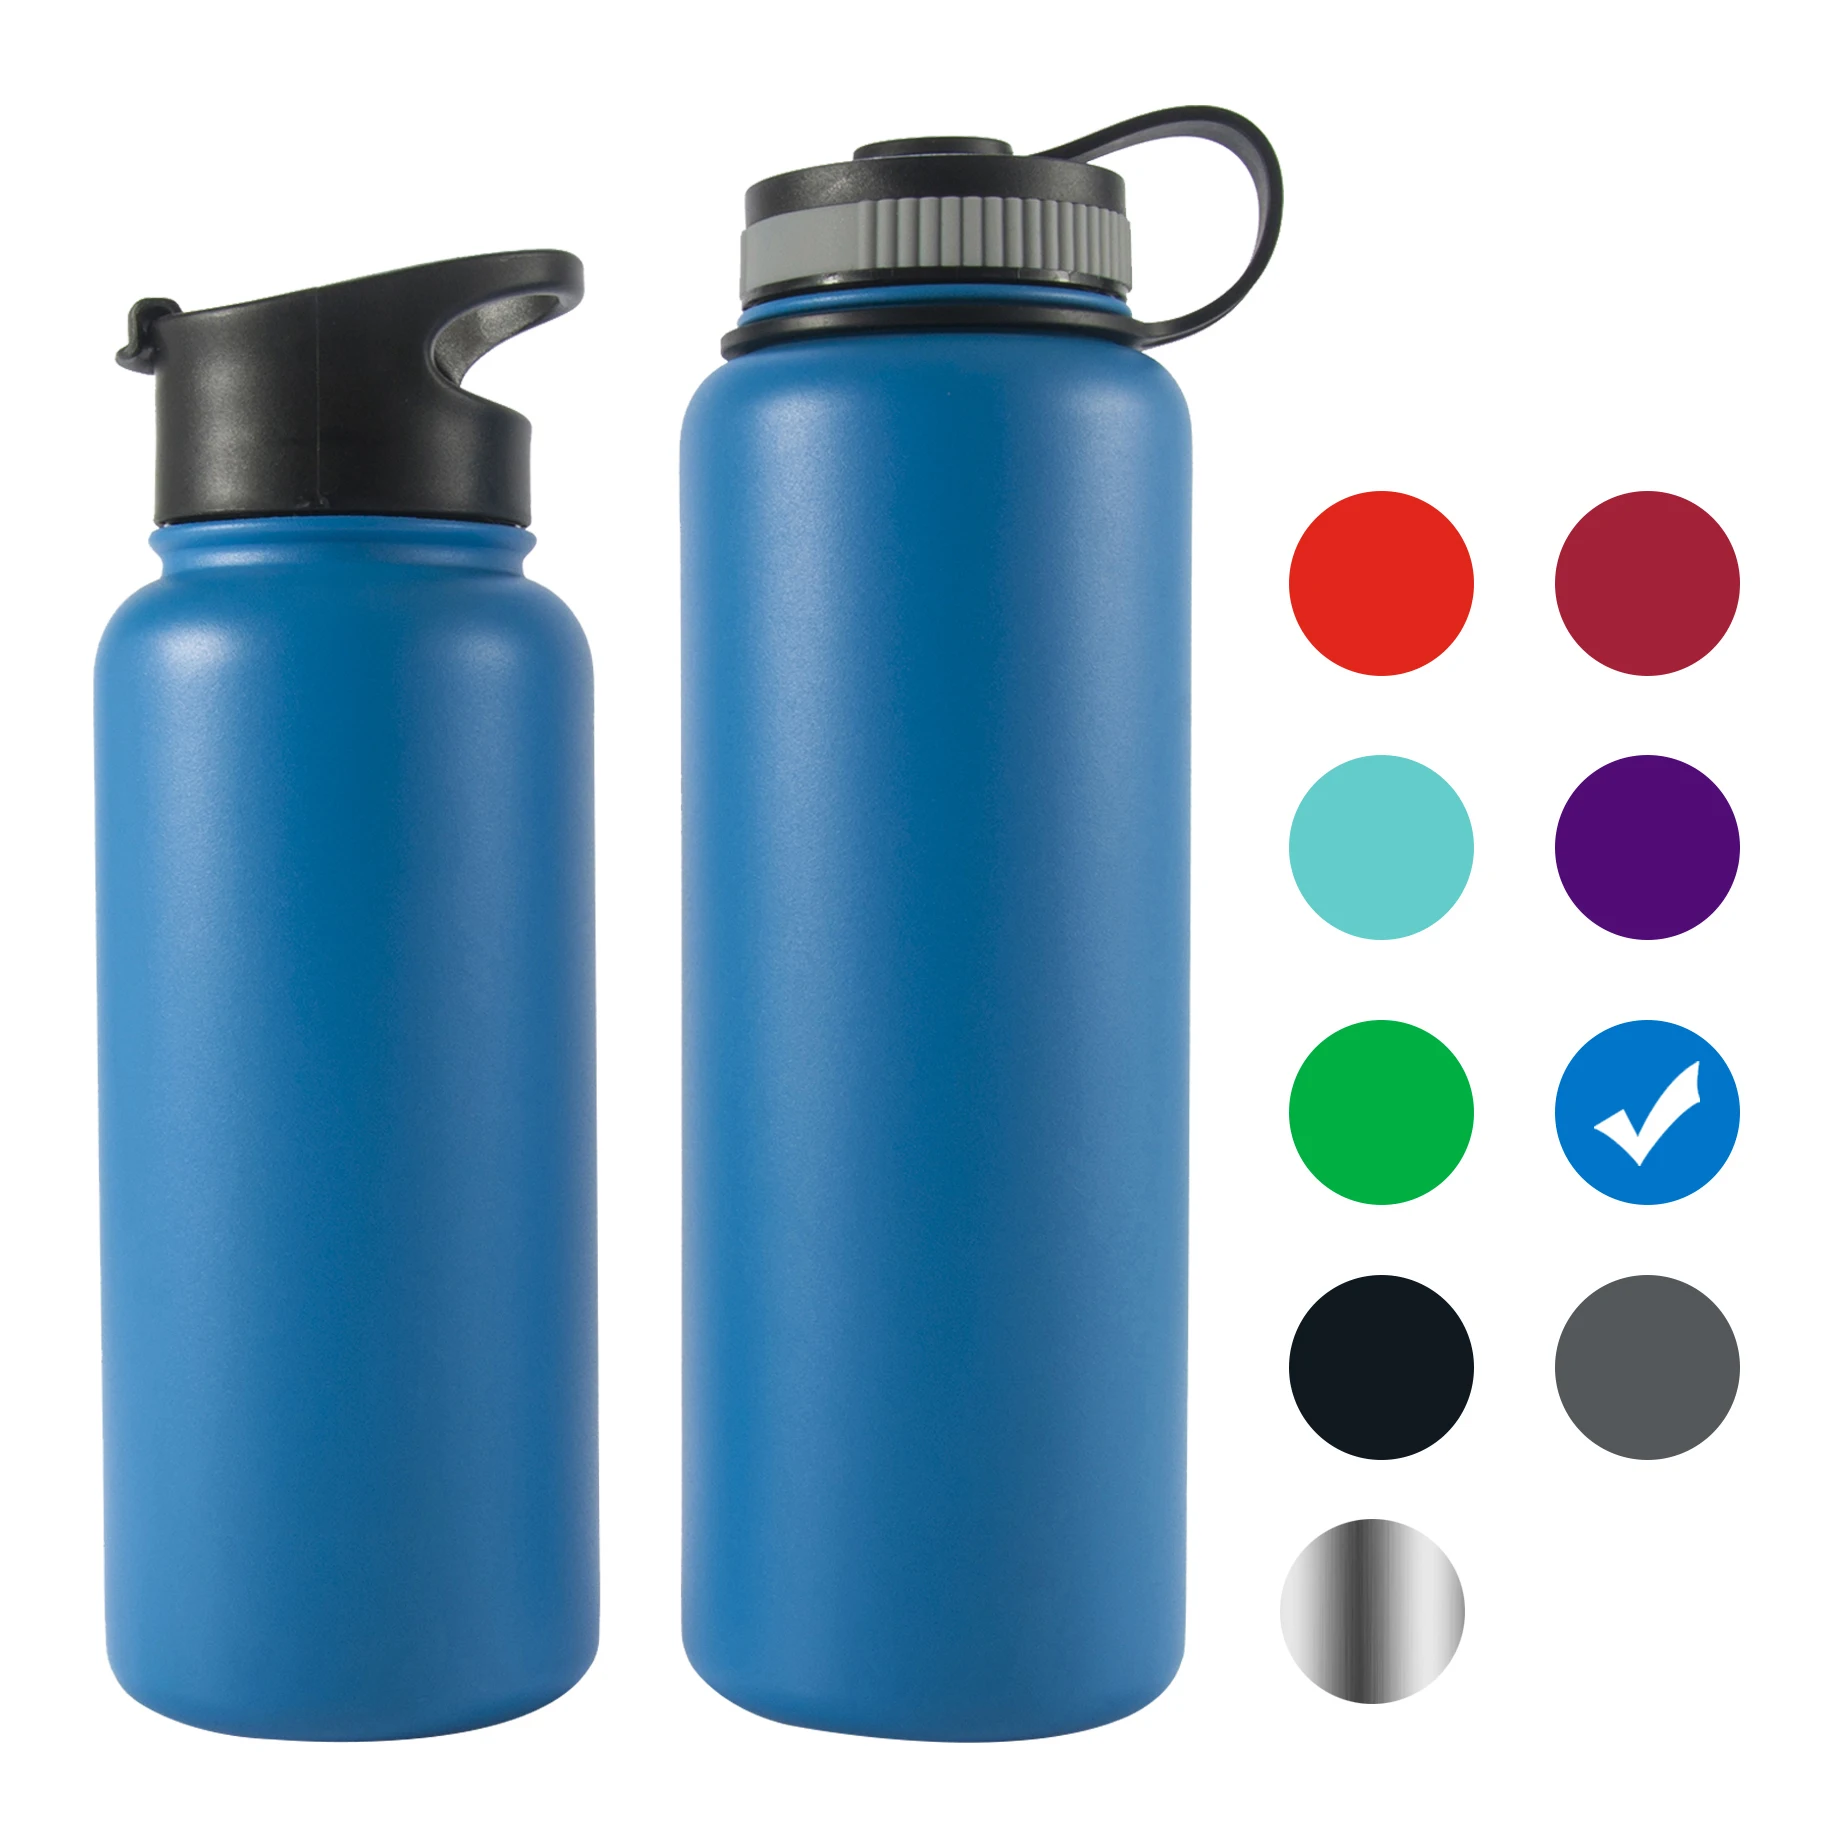 

Everich Design Water Bottle 500ml Stainless Steel Insulated Flask Transparent Custom BPA Free Thermos Leakproof Private Label, Pantone color